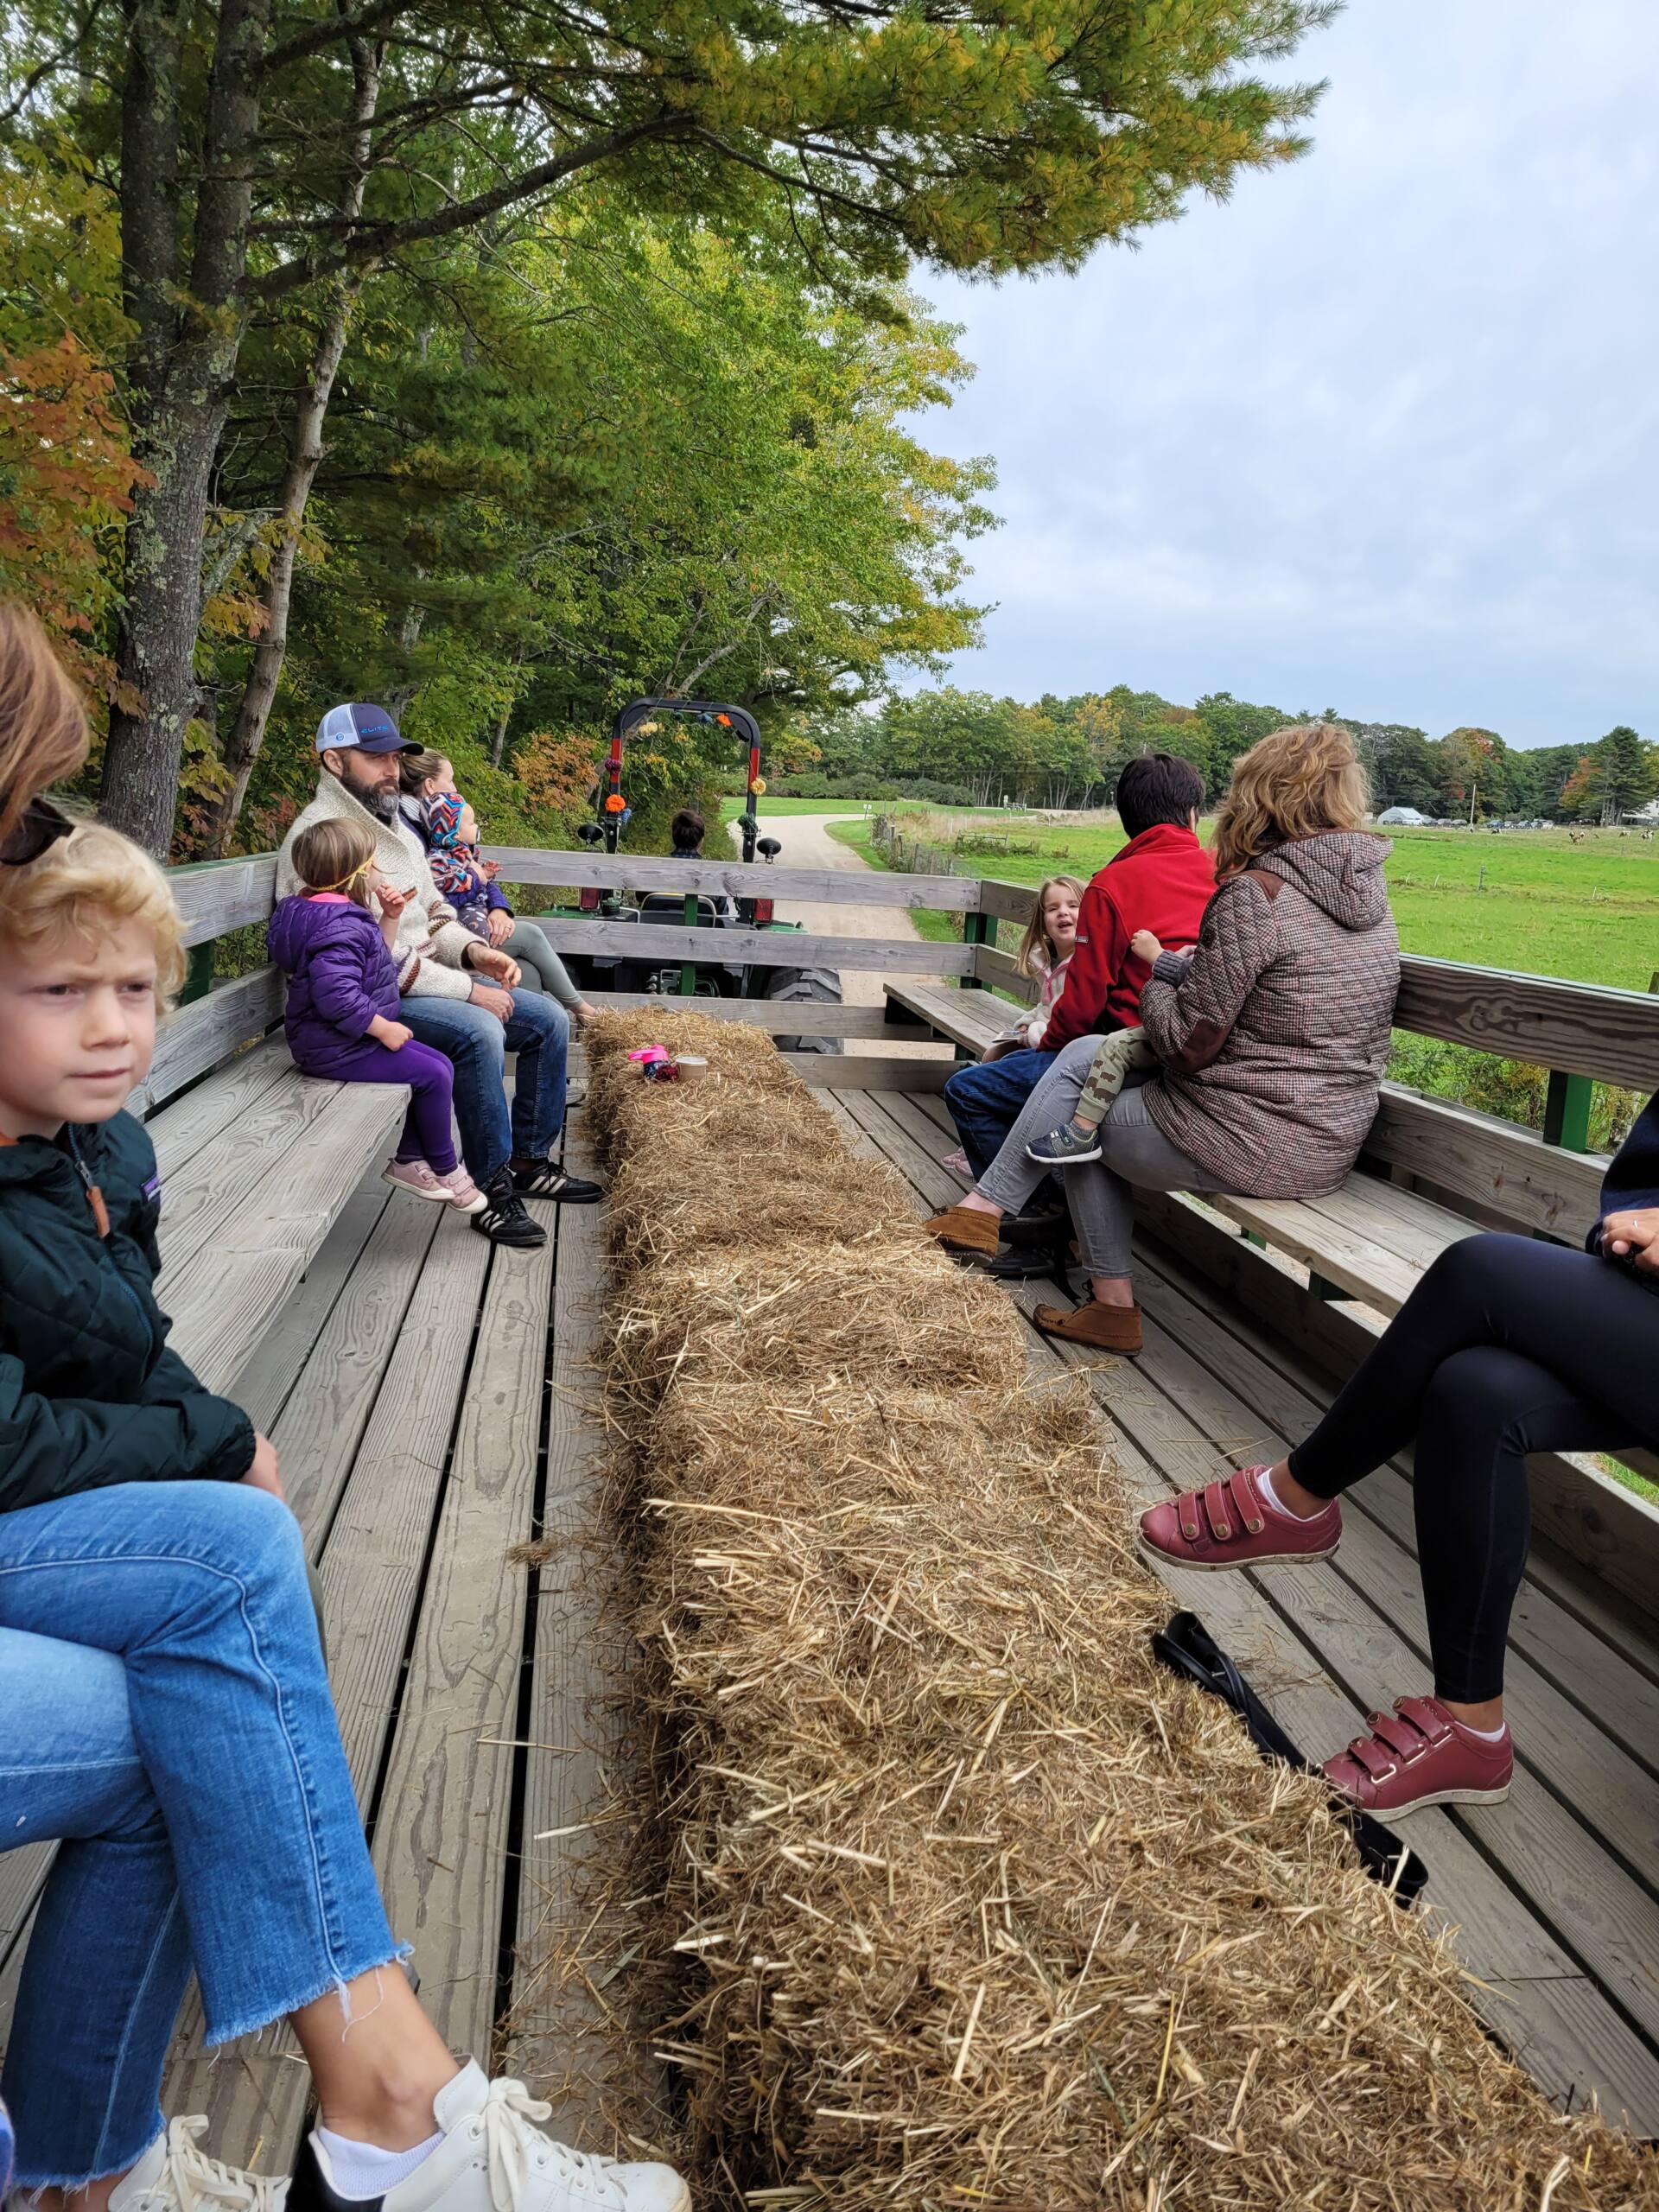 families on a hay ride